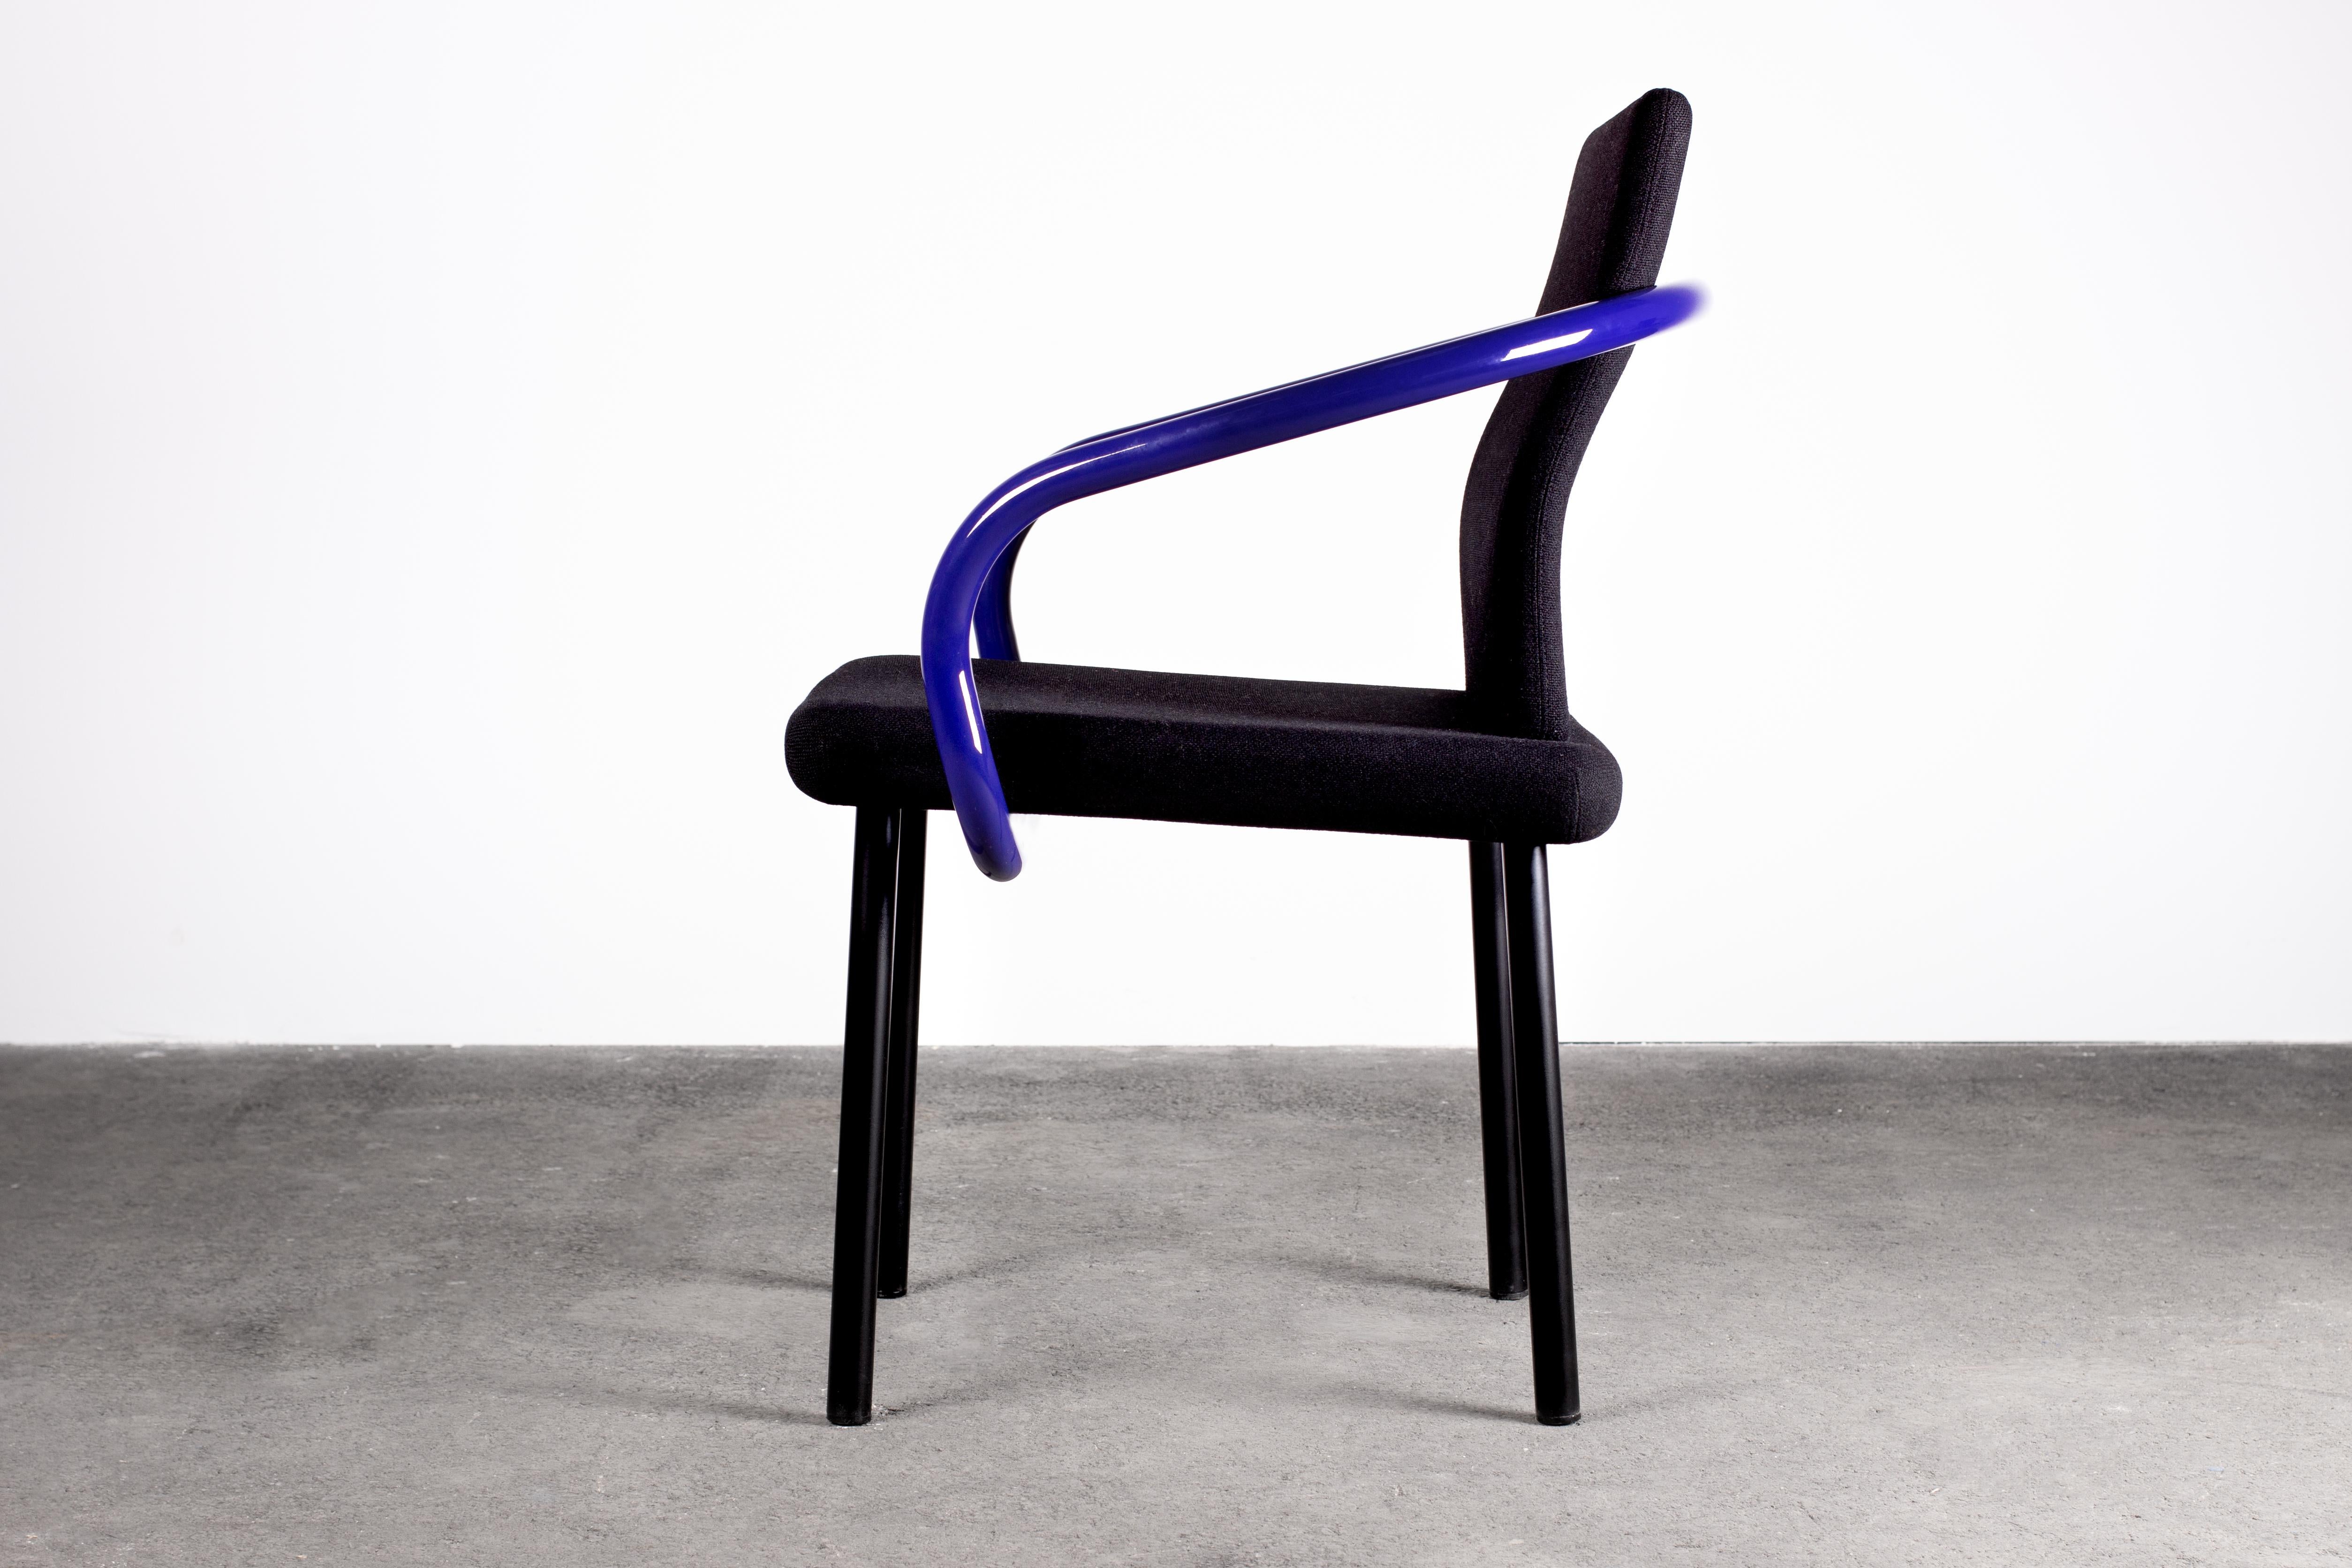 Italian Pair of Ettore Sottsass Mandarin Chairs for Knoll in Violet & Black